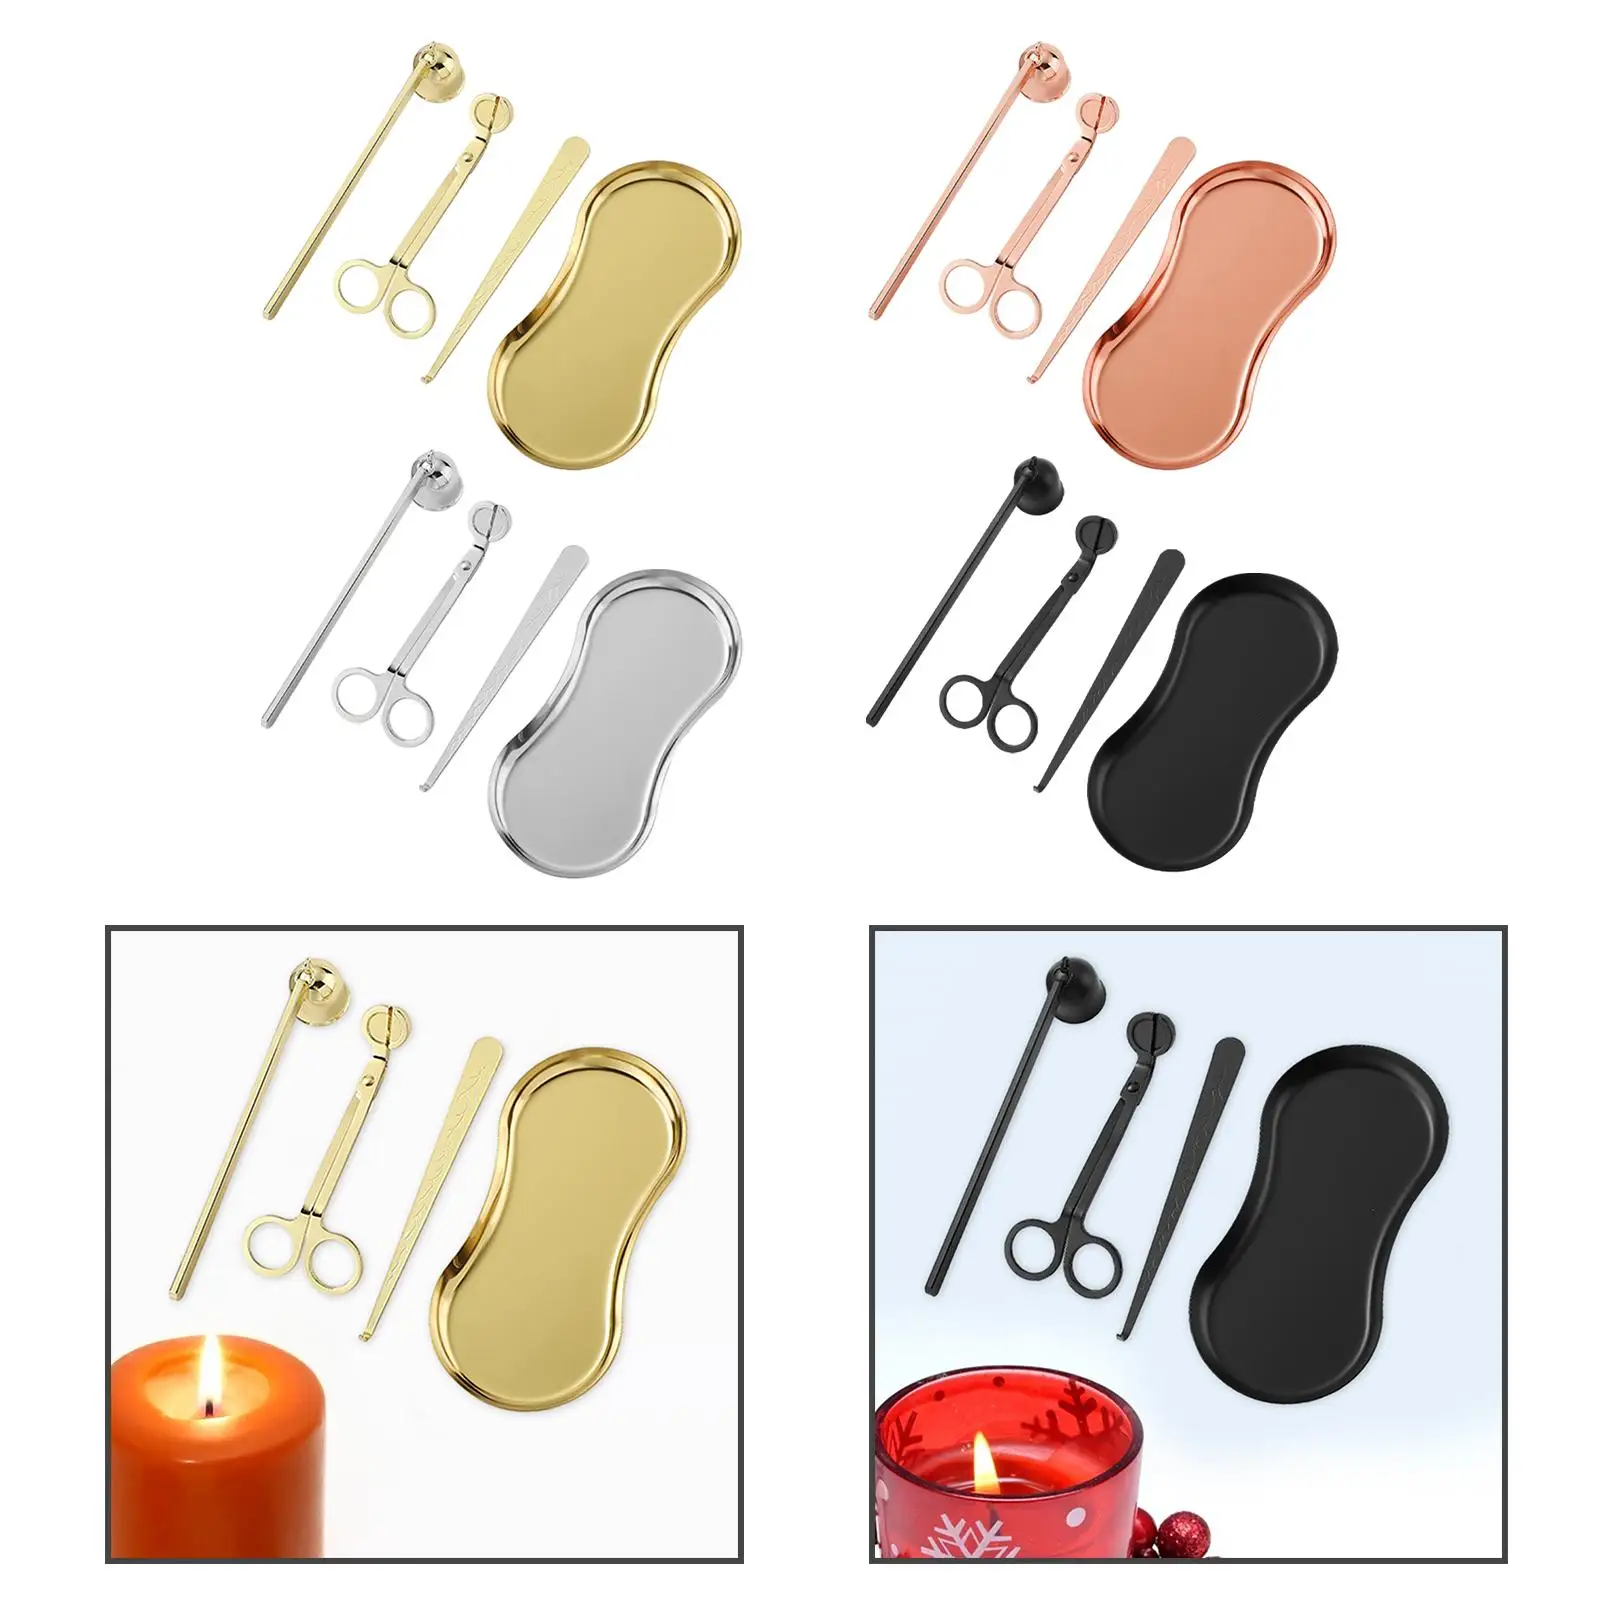 4 in 1 Candle Wick Trimmer Snuffer Set Versatile Sturdy Rust Proof Scratch Resistant Professional Candle Care Tool with Tray